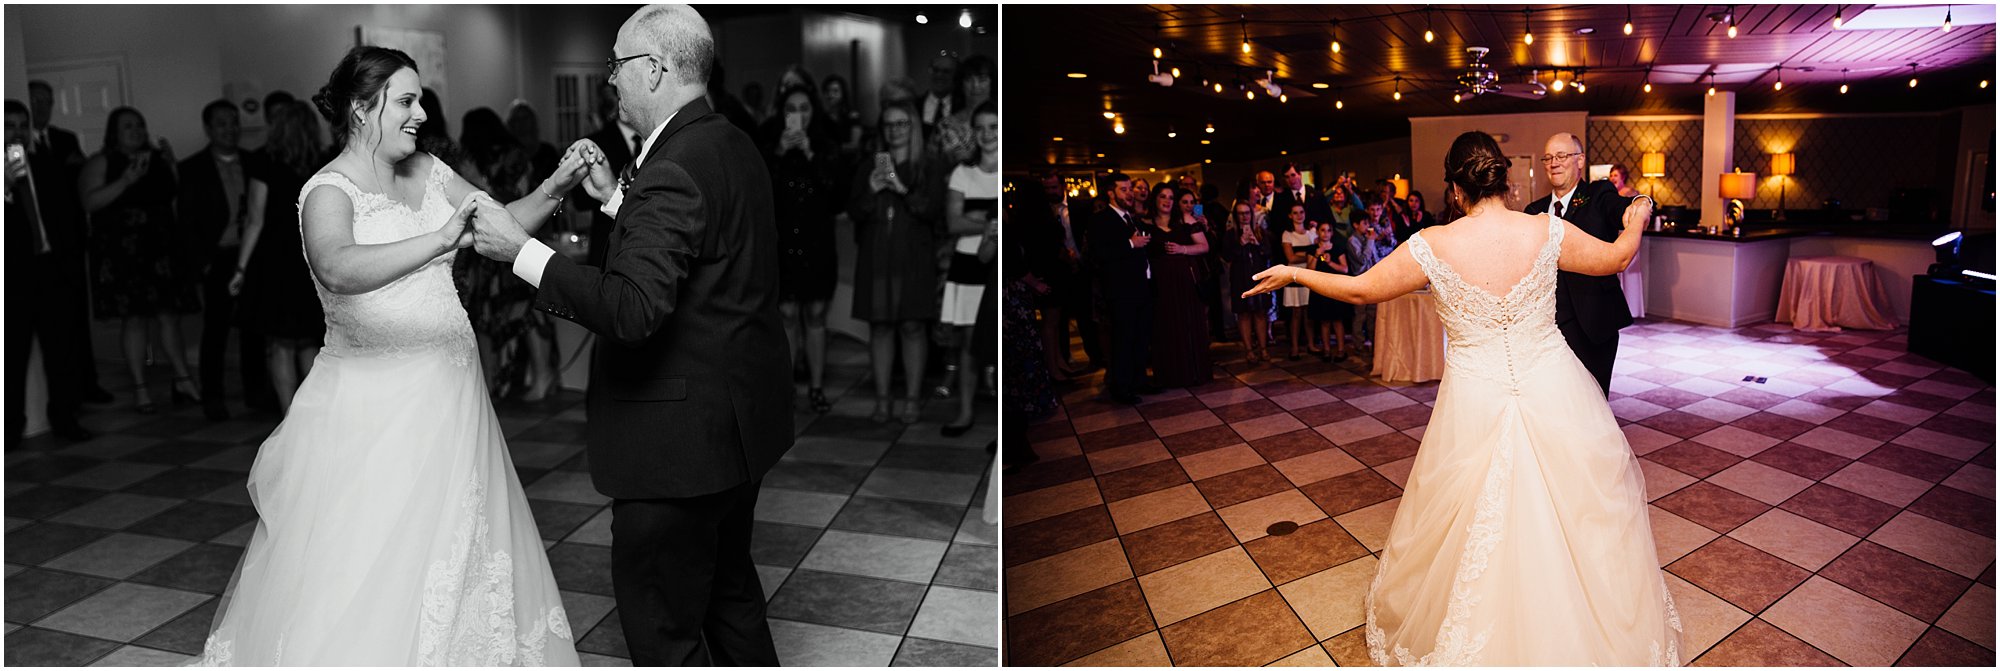 Father and daughter dancing together at Memphis wedding reception